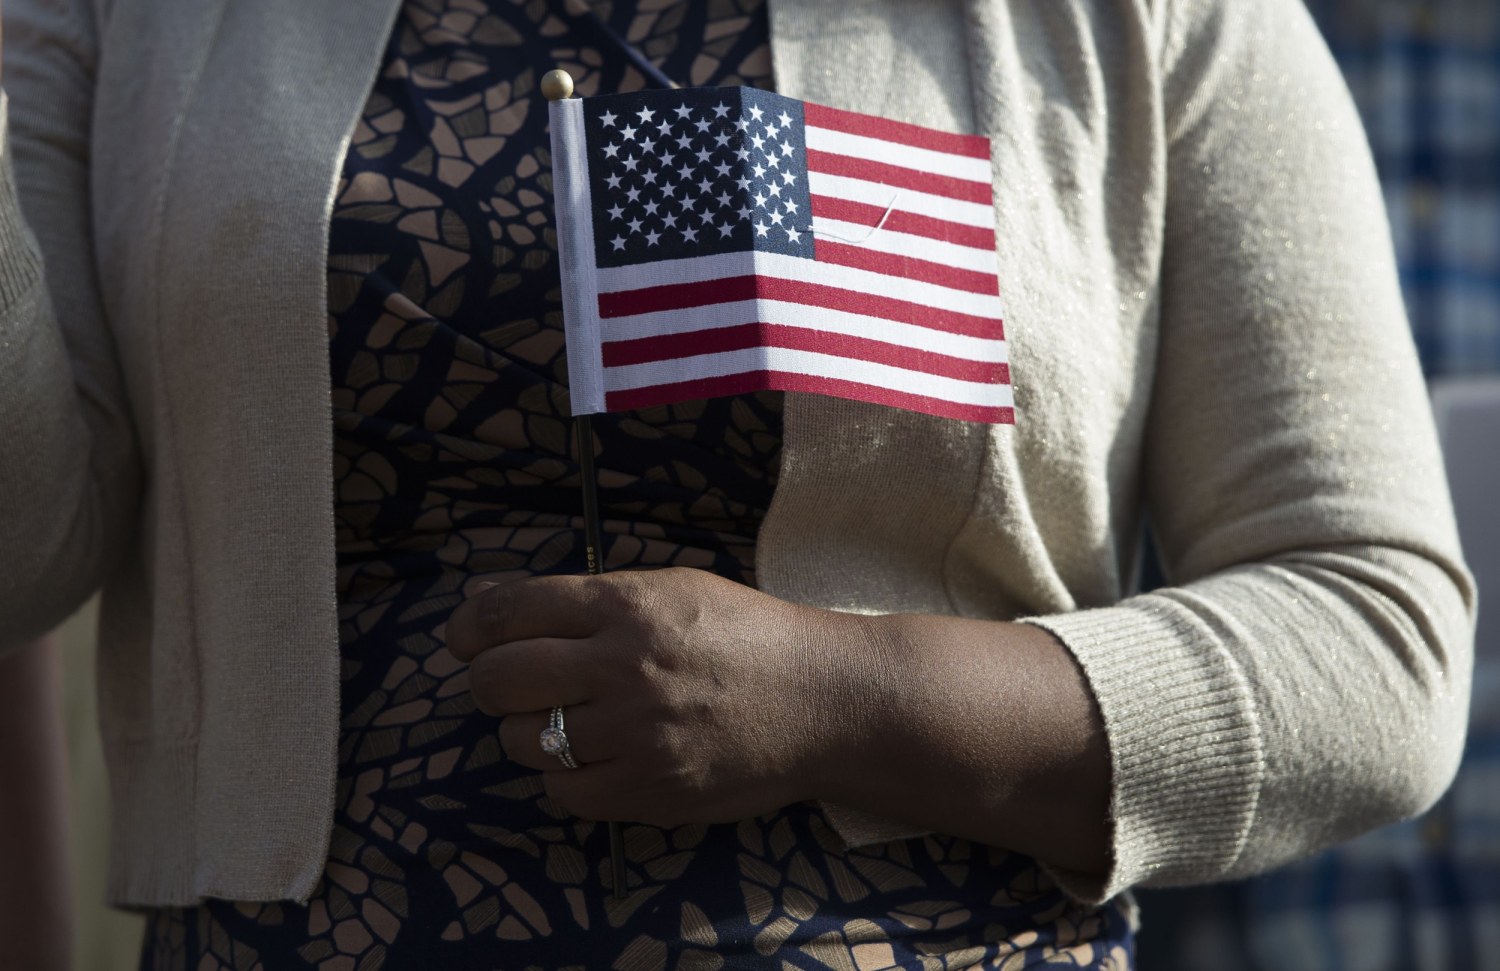 Can't immigrants get citizenship through marriage? For undocumented, it's  tough odds